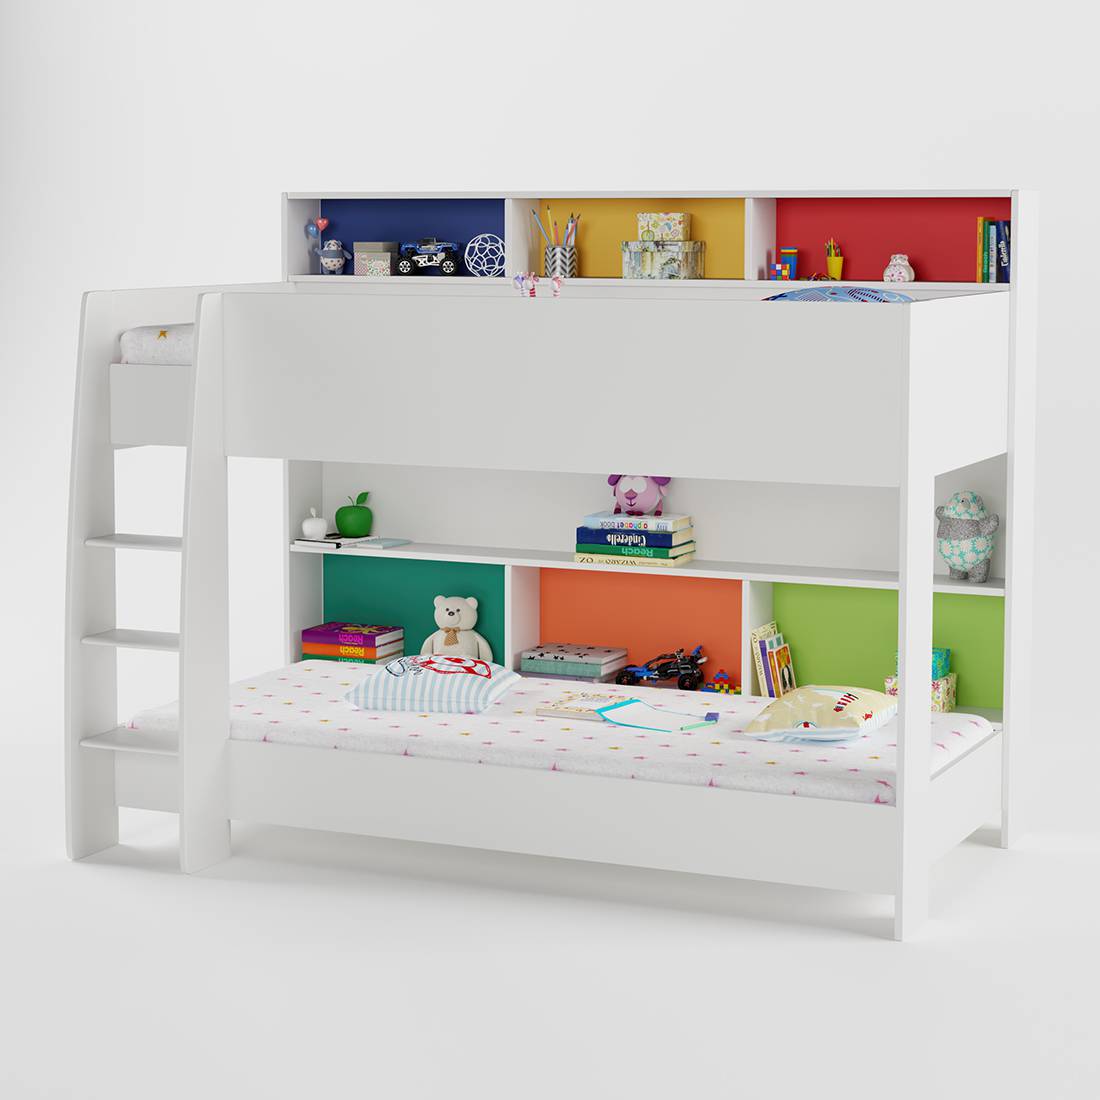 Bunk Bed Beds In India, Bunk Beds With Storage Drawers